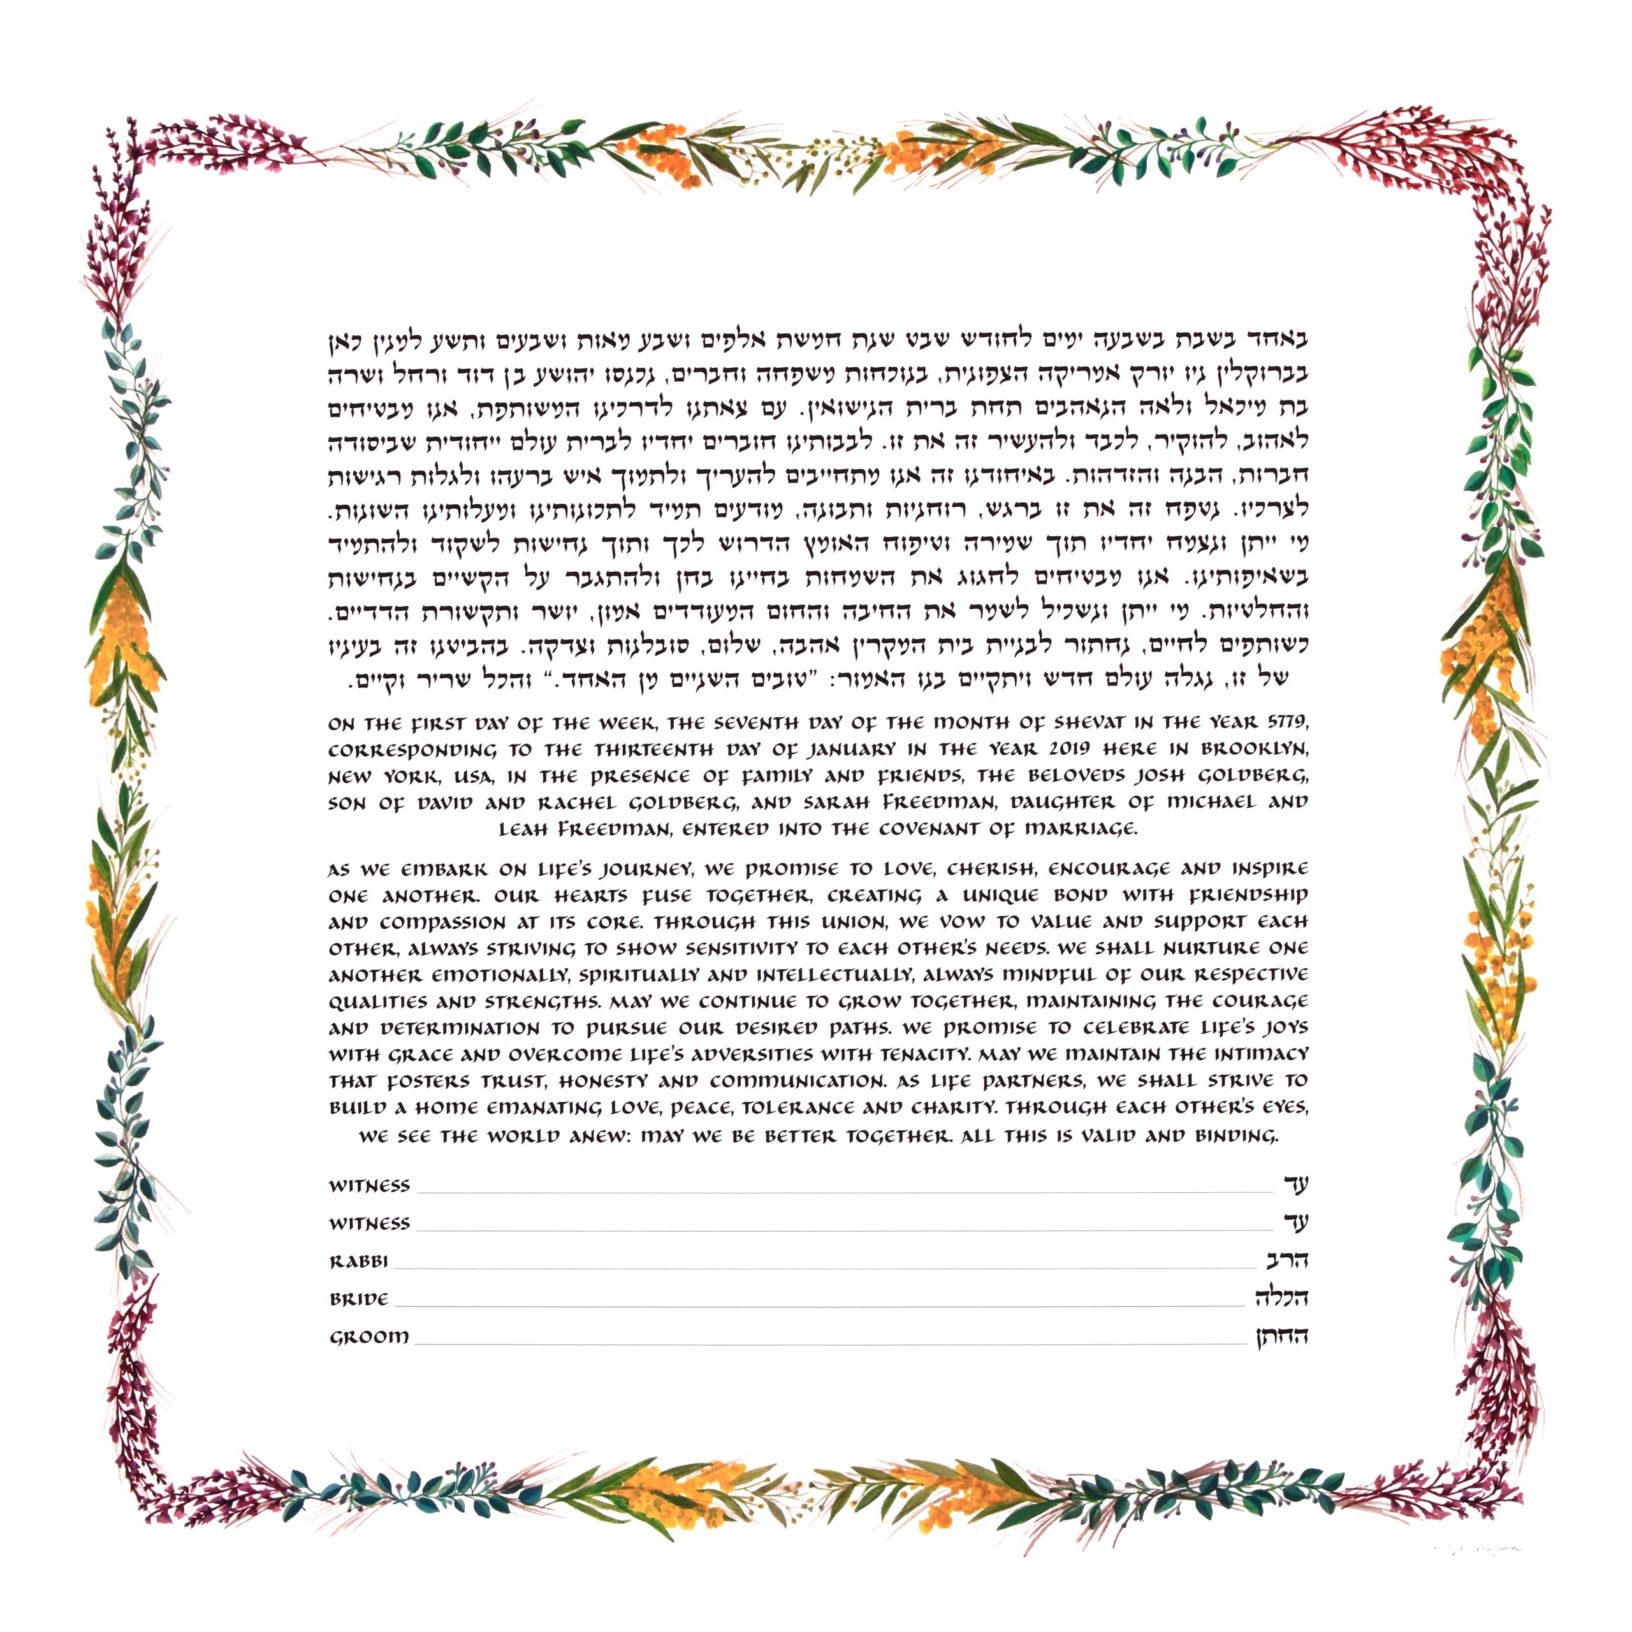 Witch Hazel And Eucalyptus Ketubah Jewish Marriage Contracts by Elyse Meyerson